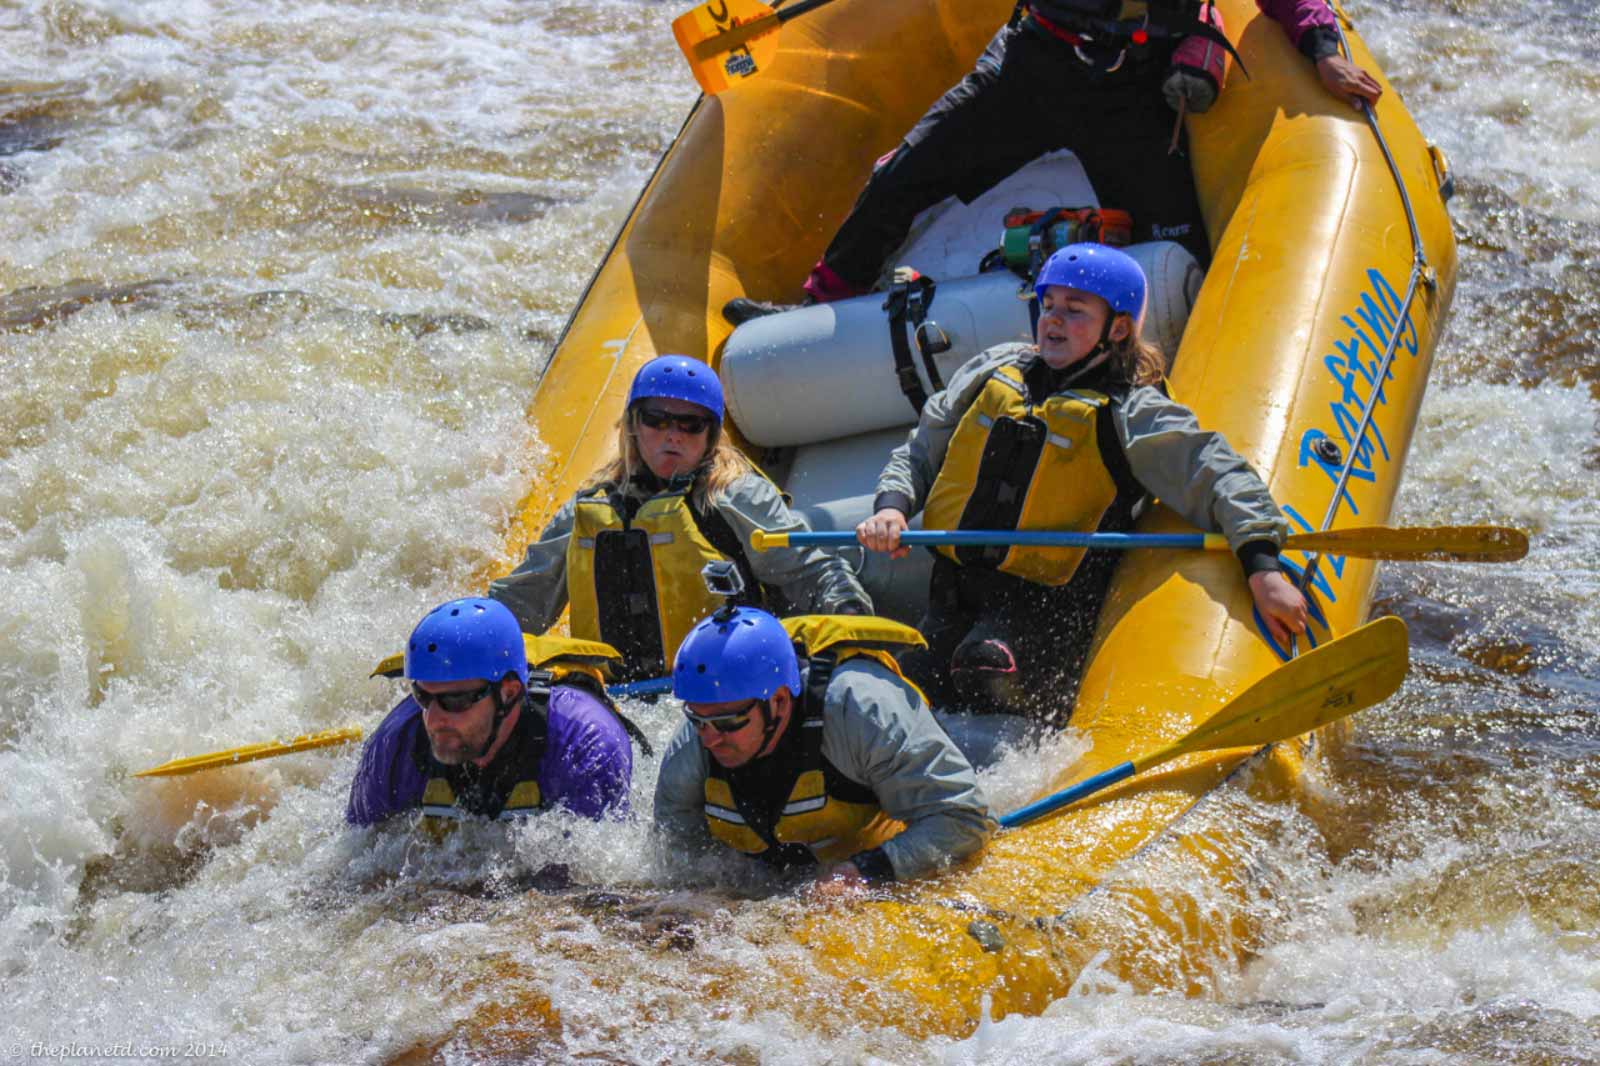 things to do in ontario canada - whitewater rafting